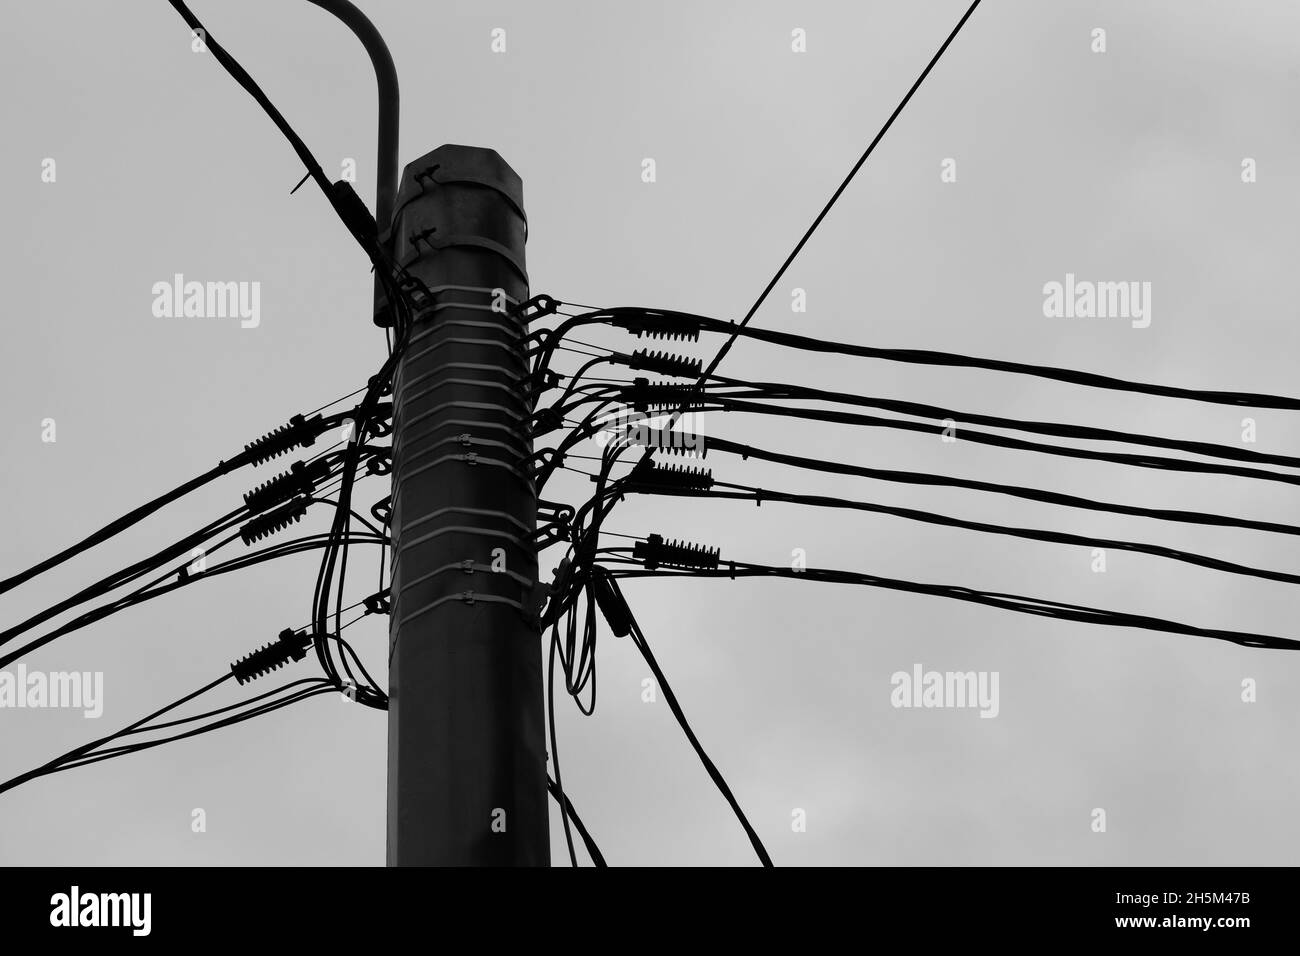 Top of a pole with power wires under cloudy sky, black and white industrial photo Stock Photo